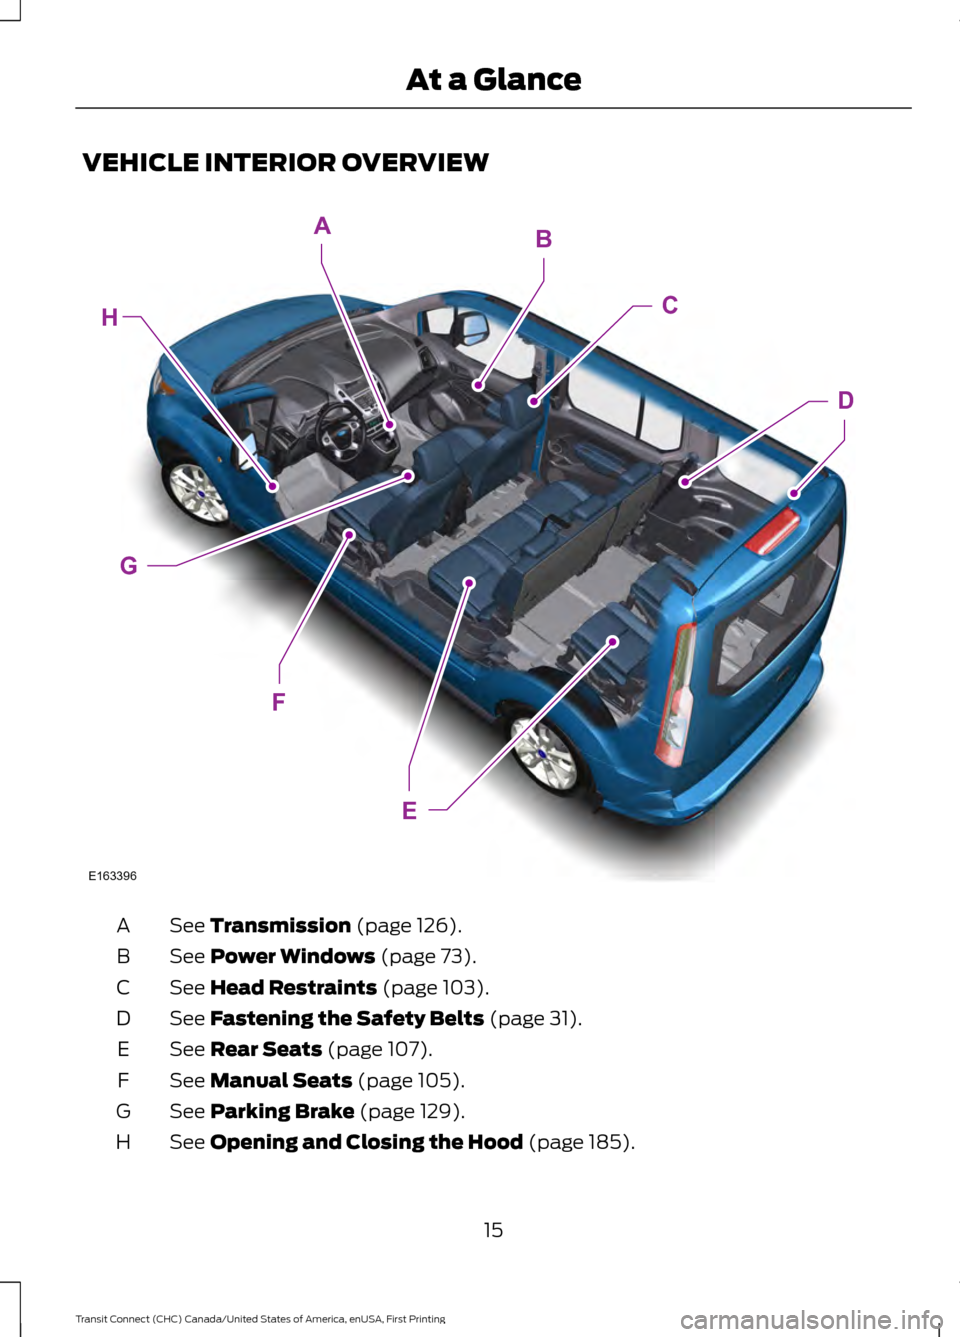 FORD TRANSIT CONNECT 2015 2.G User Guide VEHICLE INTERIOR OVERVIEW
See Transmission (page 126).
A
See 
Power Windows (page 73).
B
See 
Head Restraints (page 103).
C
See 
Fastening the Safety Belts (page 31).
D
See 
Rear Seats (page 107).
E
S